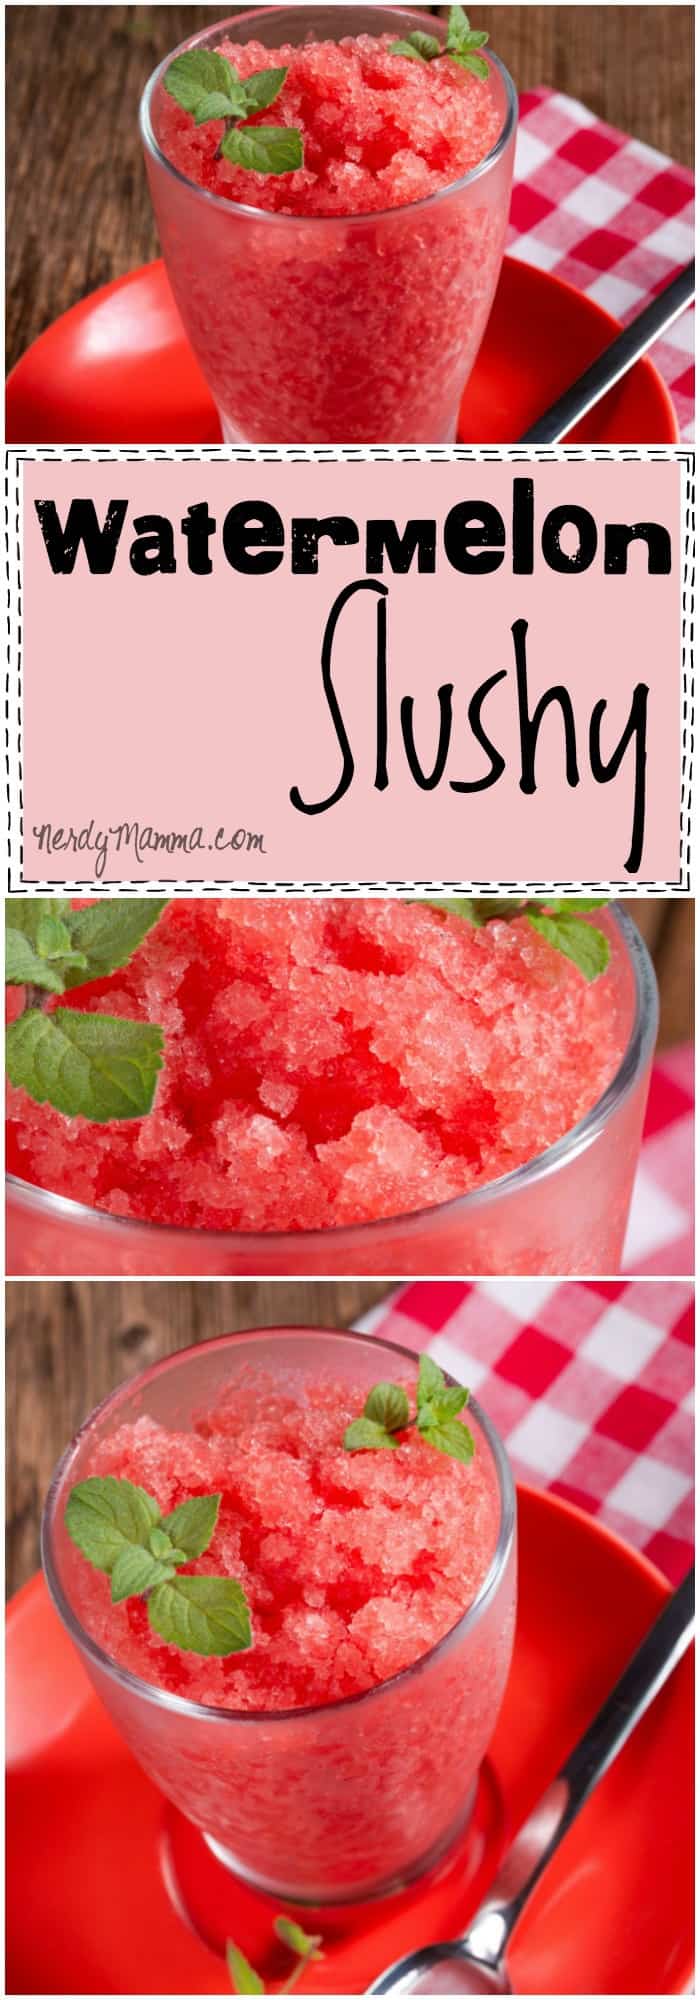 I love this recipe for this easy watermelon slushy. It's so awesome!